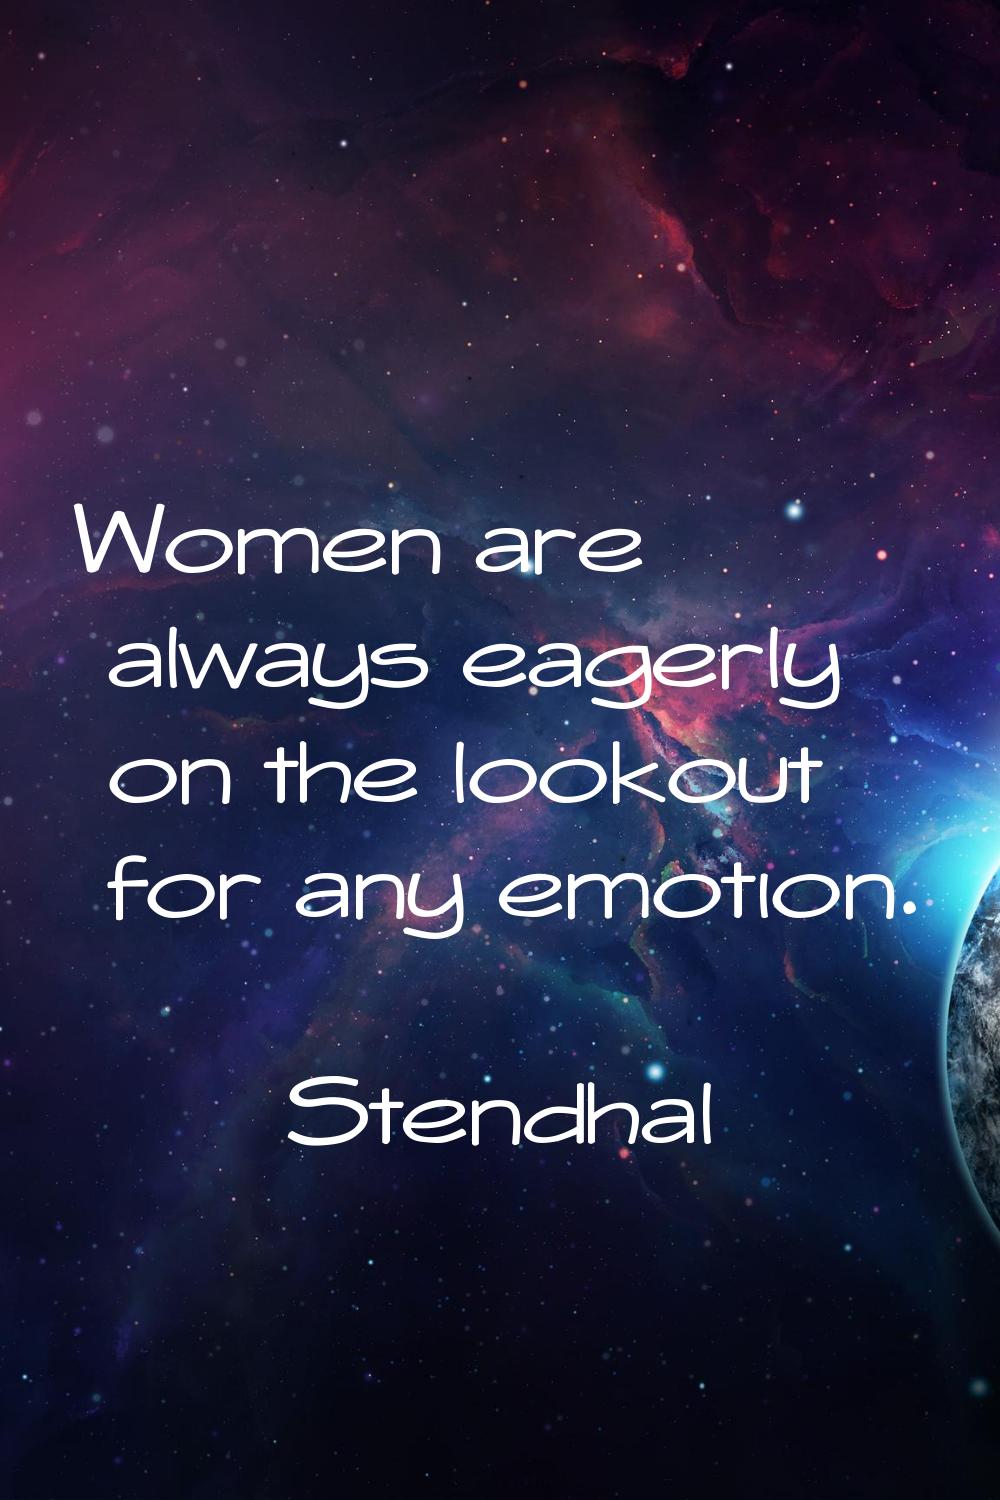 Women are always eagerly on the lookout for any emotion.